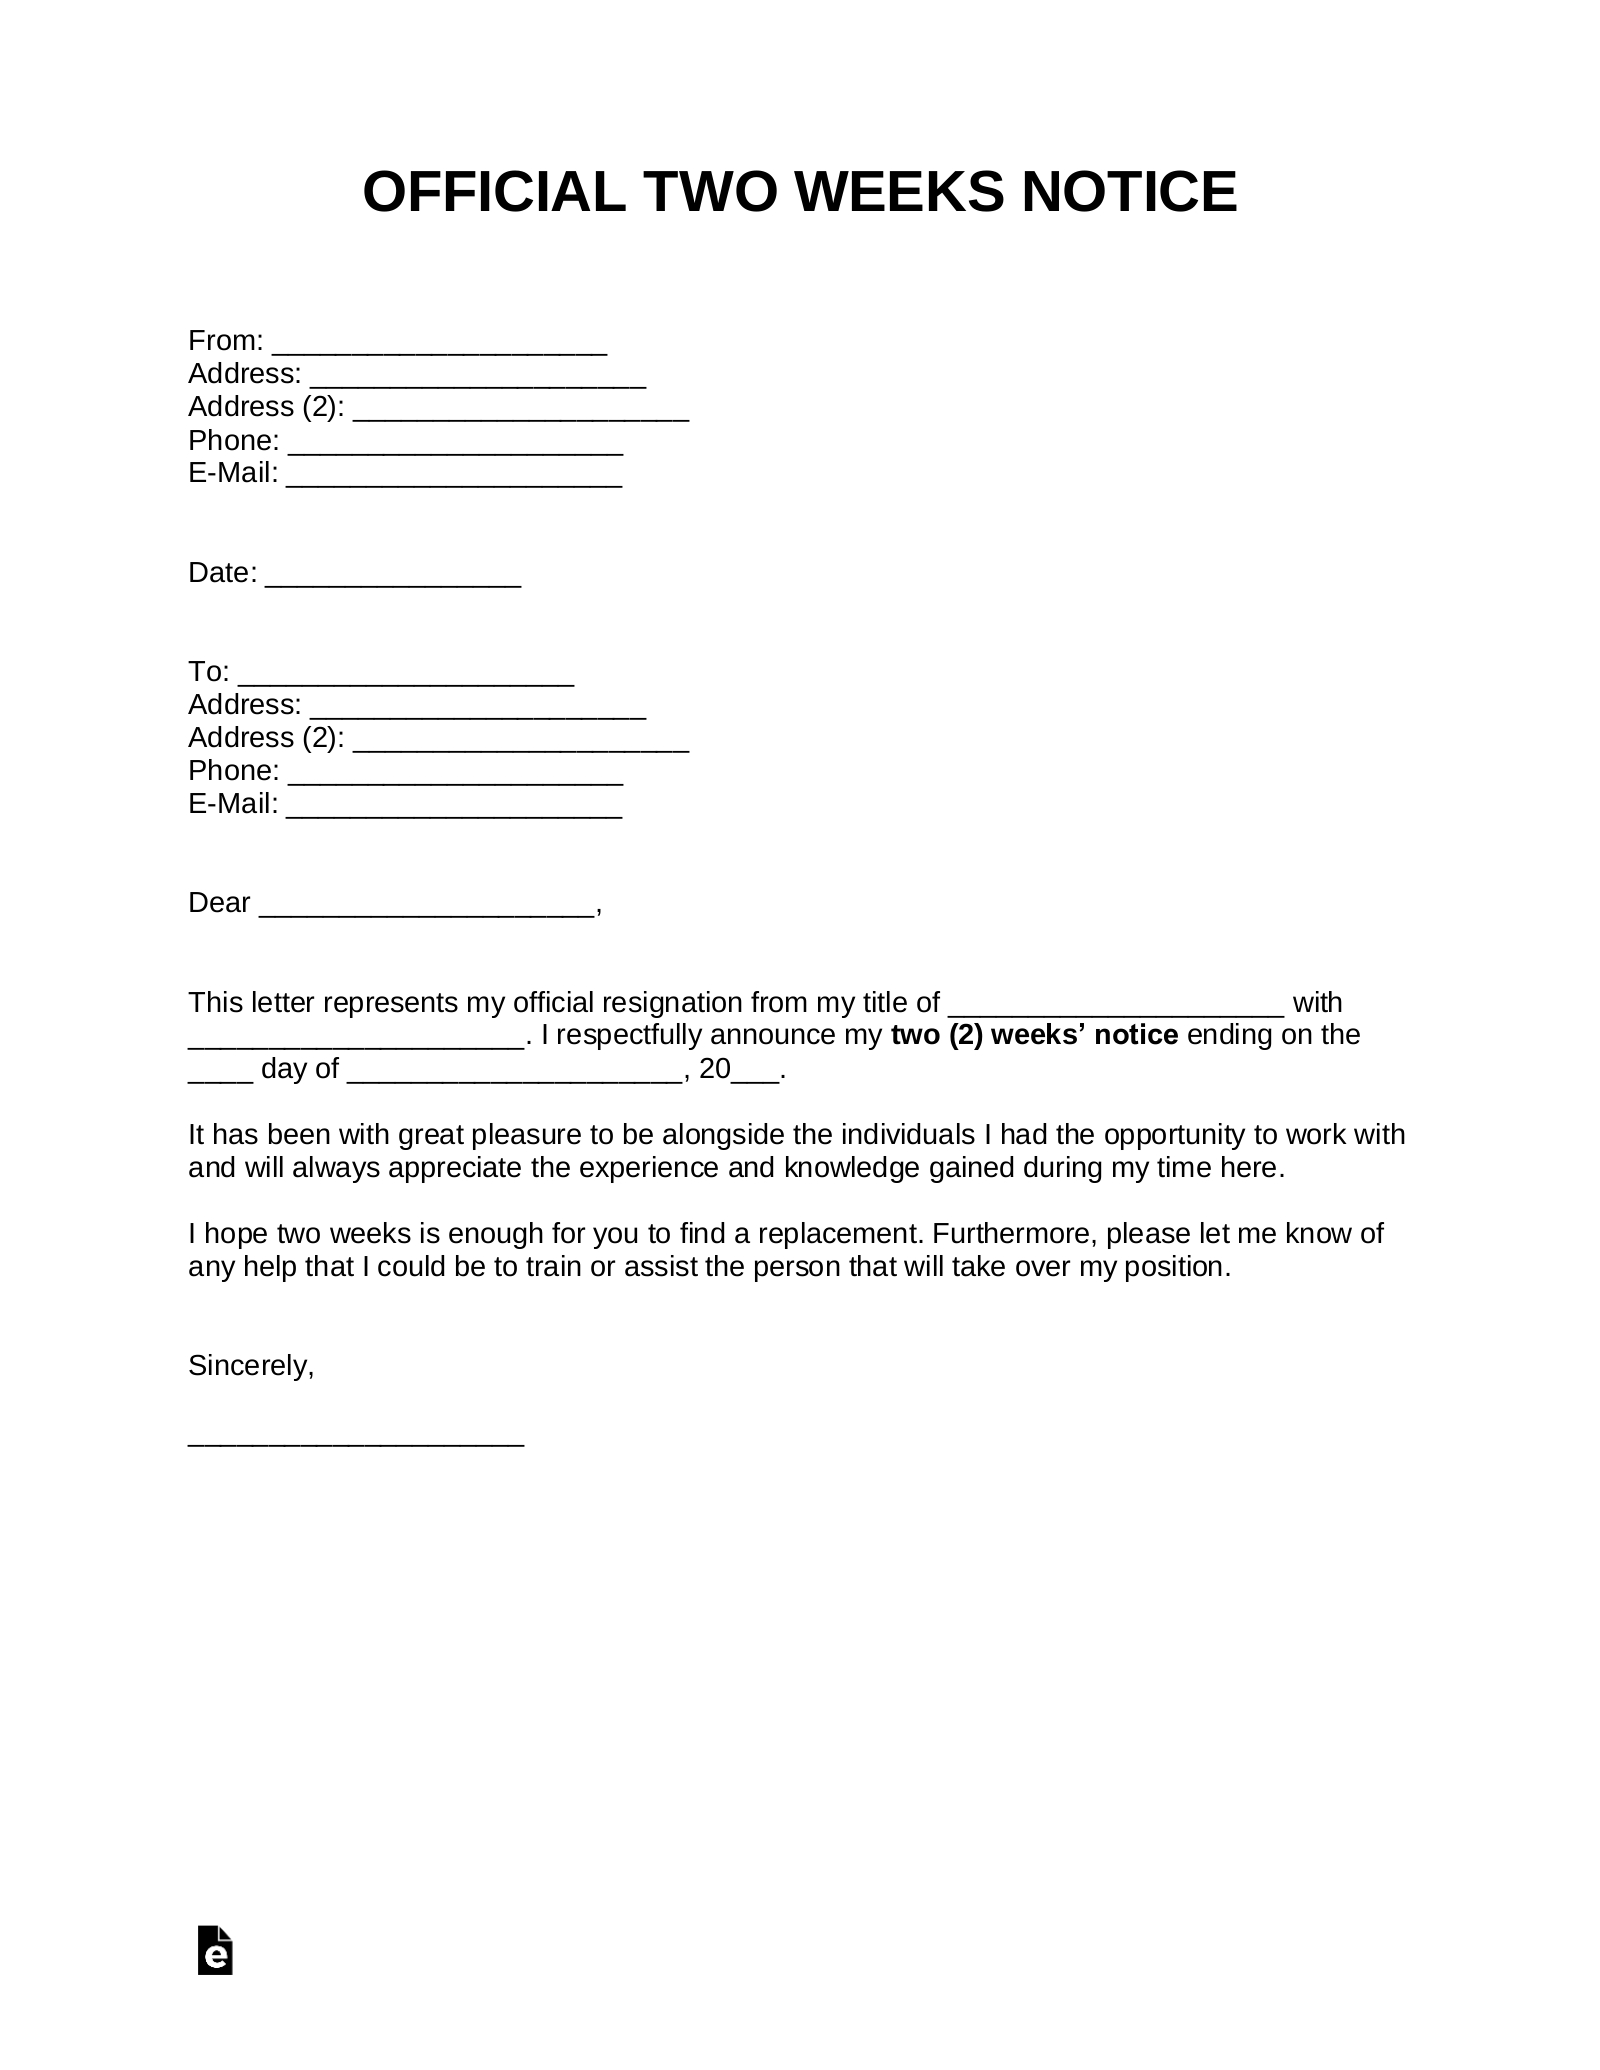 Free Two Weeks Notice Letter | Templates & Samples - Pdf Inside Two Week Notice Template Word